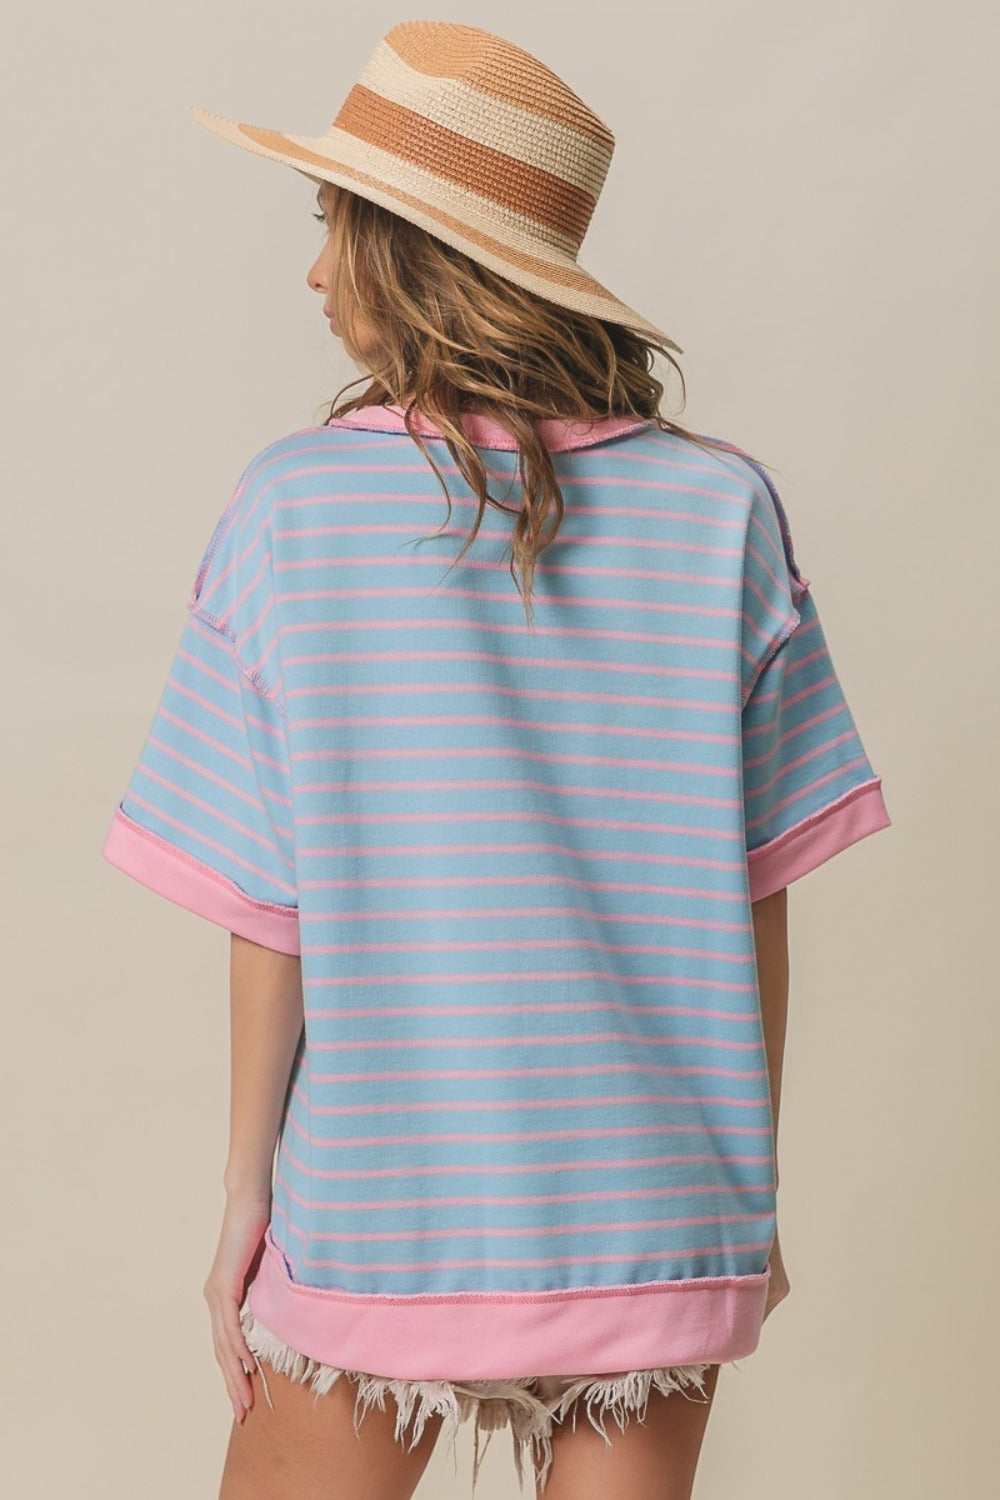 Exposed Seams Striped Contrast T-Shirt in Light Blue Blush